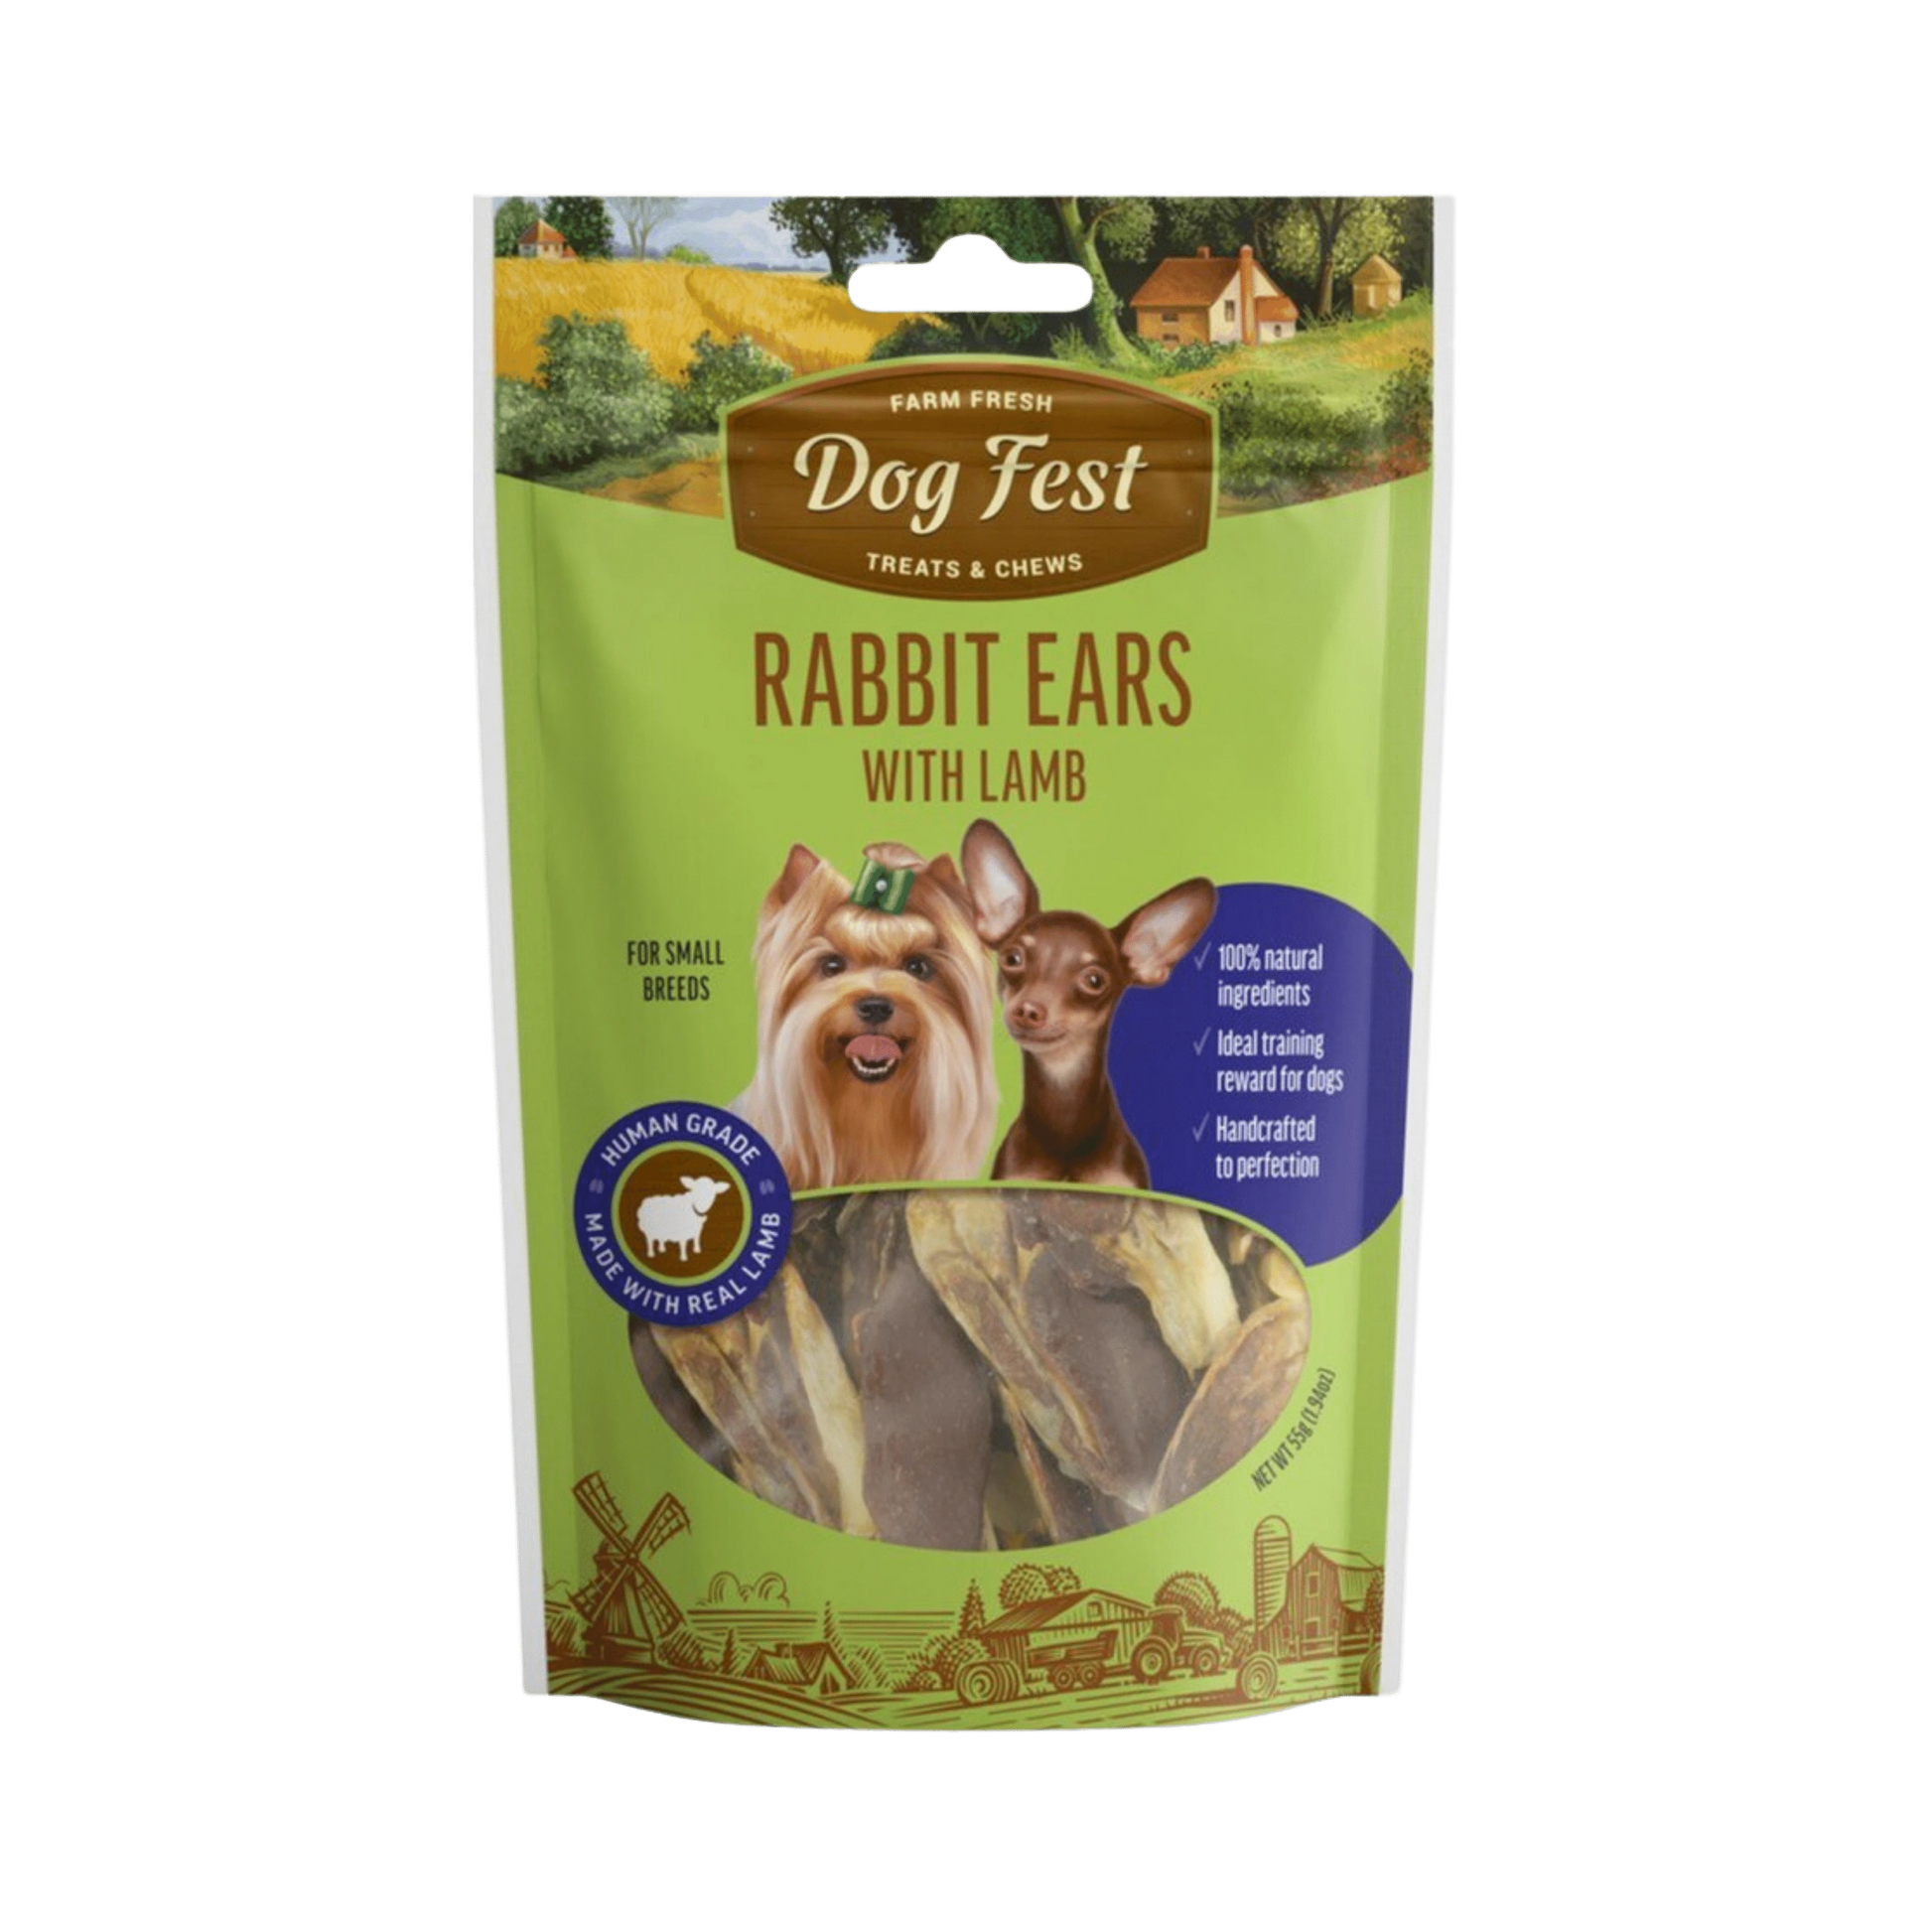 DOGFEST RABBIT EARS WITH LAMB 45GM